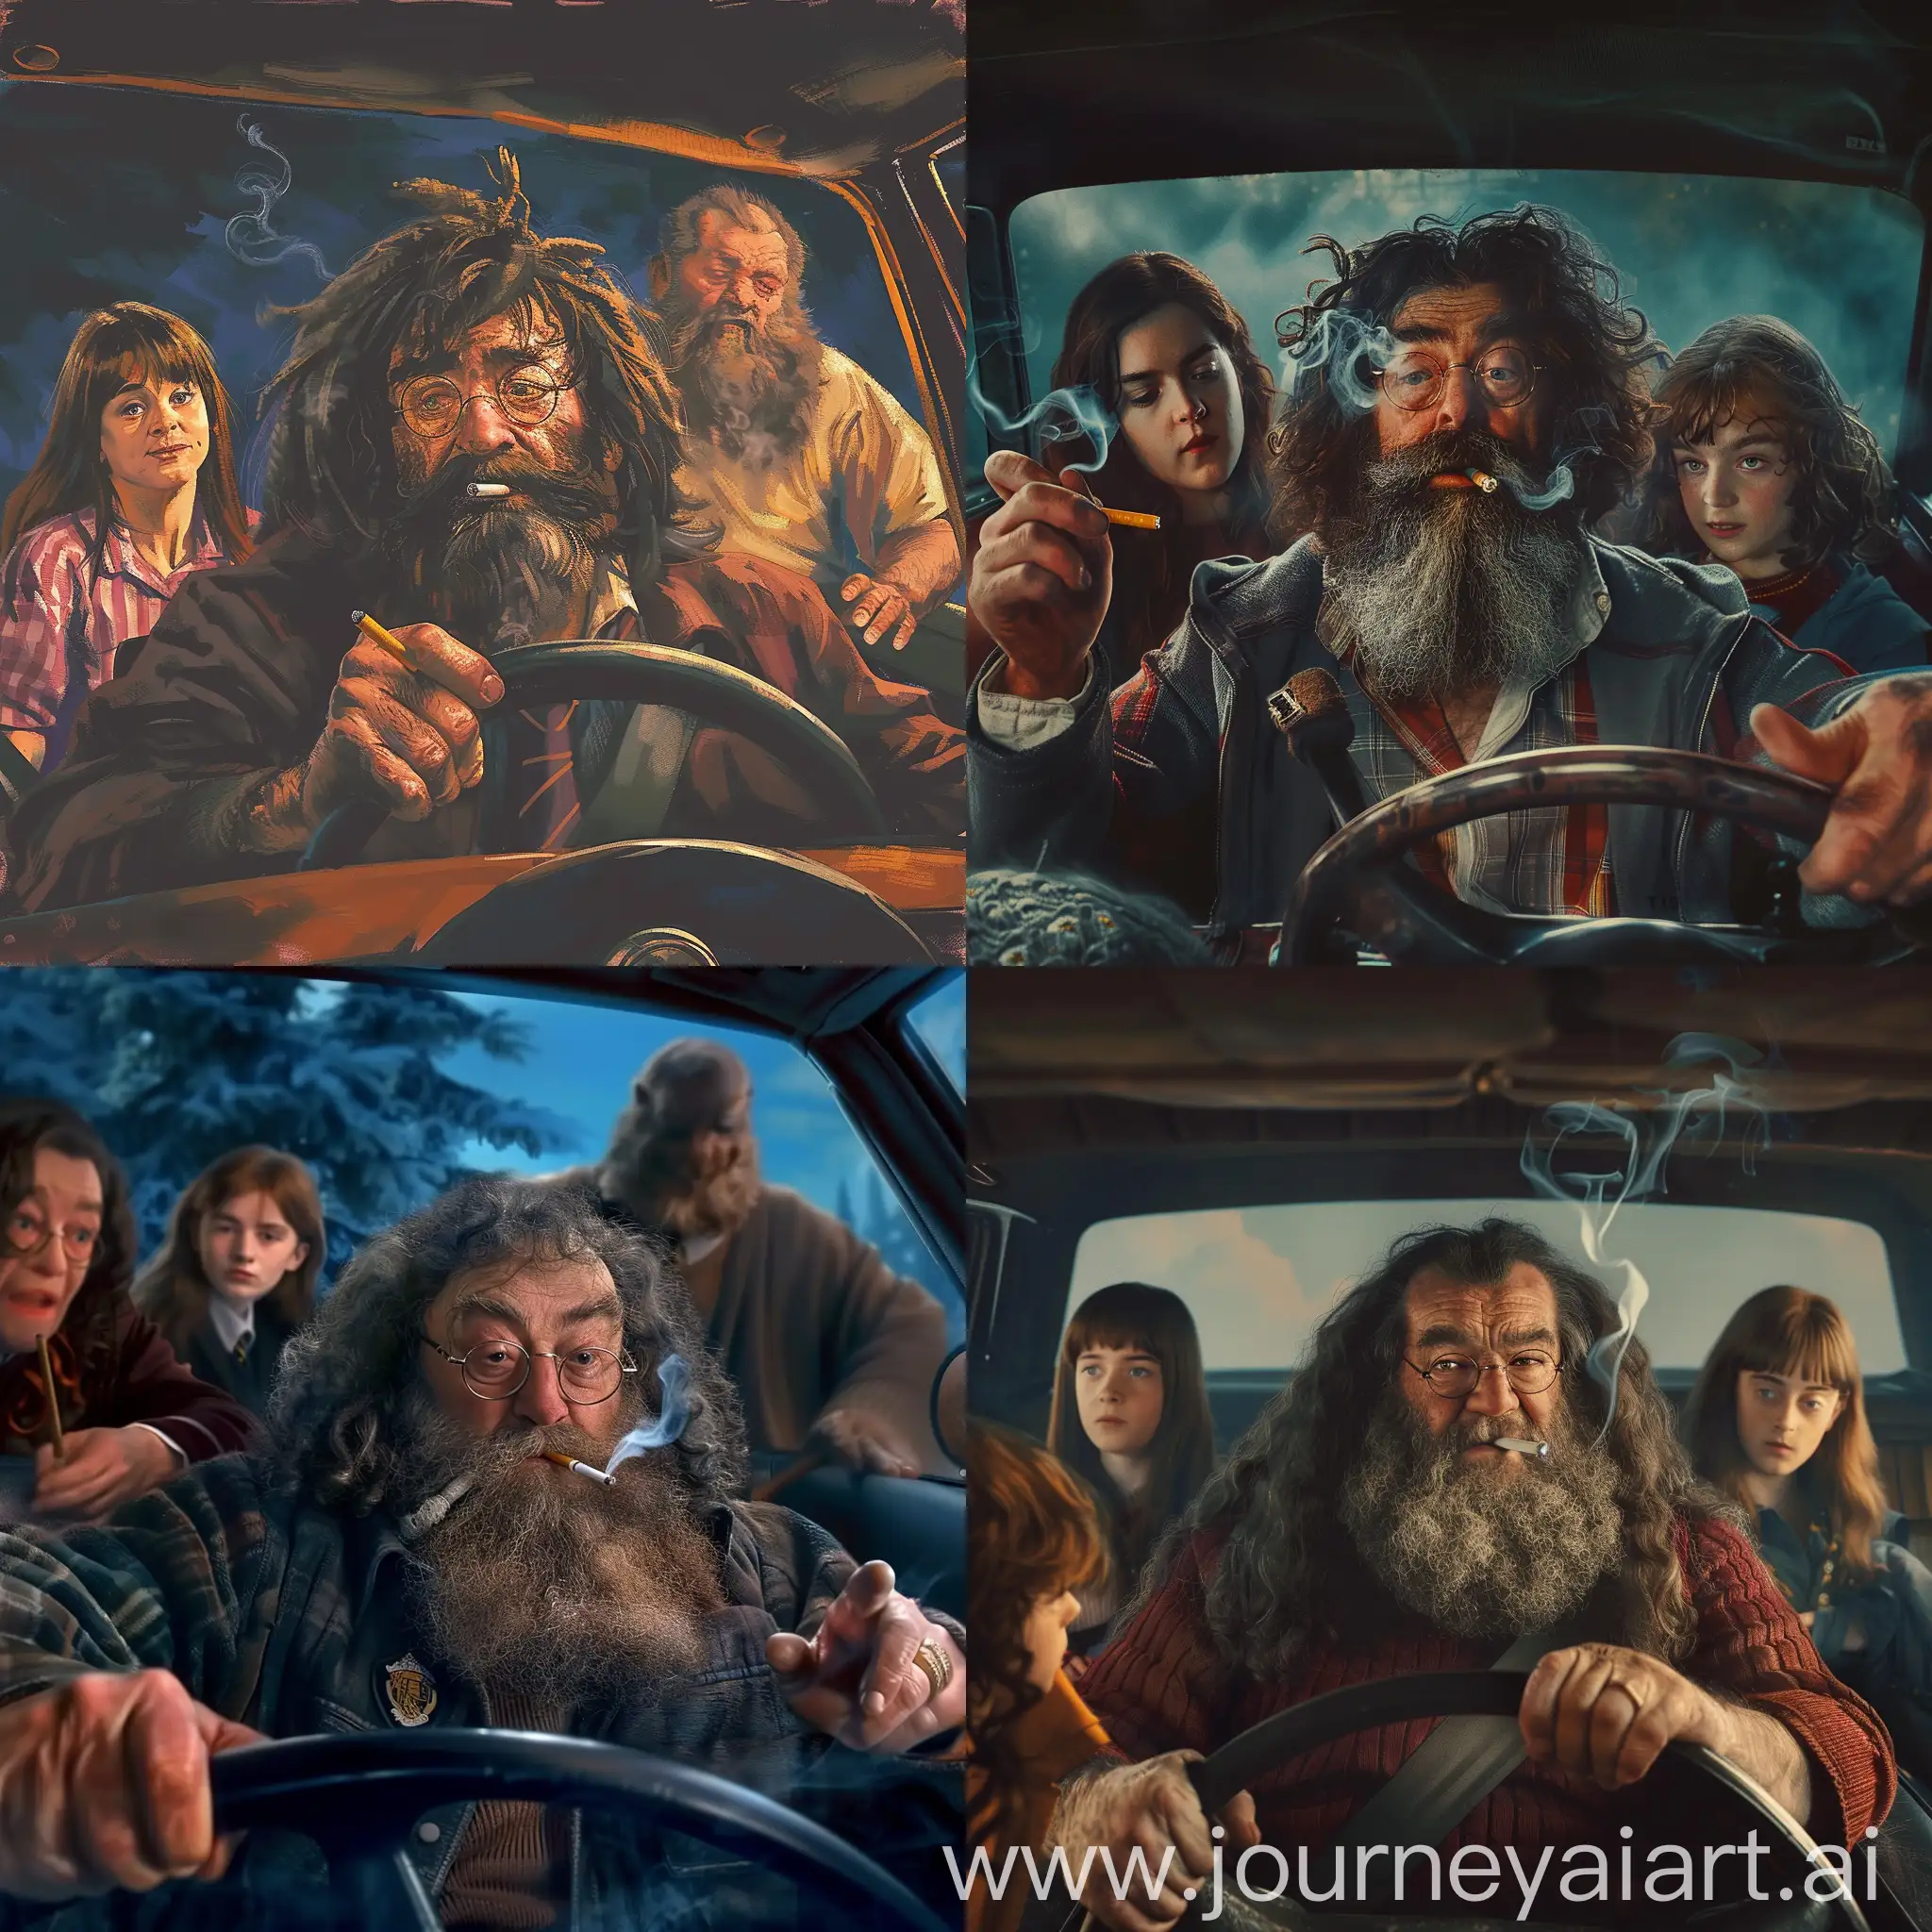 harry potter behind a wheel, Hagrid next to him, smoking cigarette like a real homie, picking up Hermione and Ginny, cinematic 